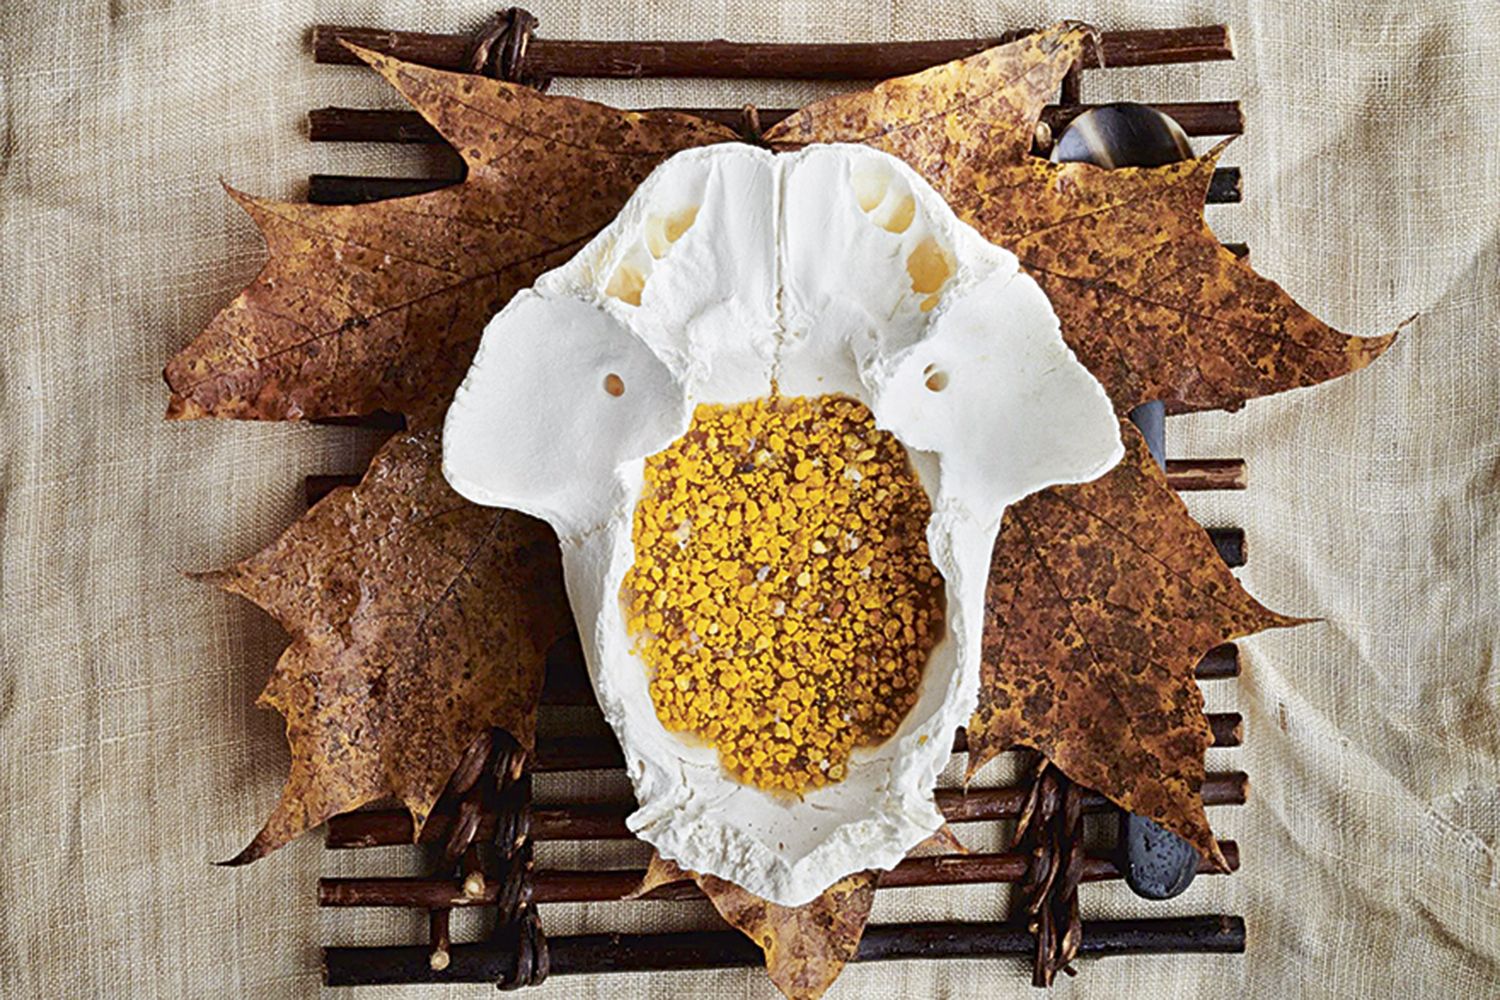 COURAGE AND HARMONY - Reindeer core sprinkled with bee pollen, from Noma: hard to swallow, the delicacy is served in the animal's skull (well bleached) -